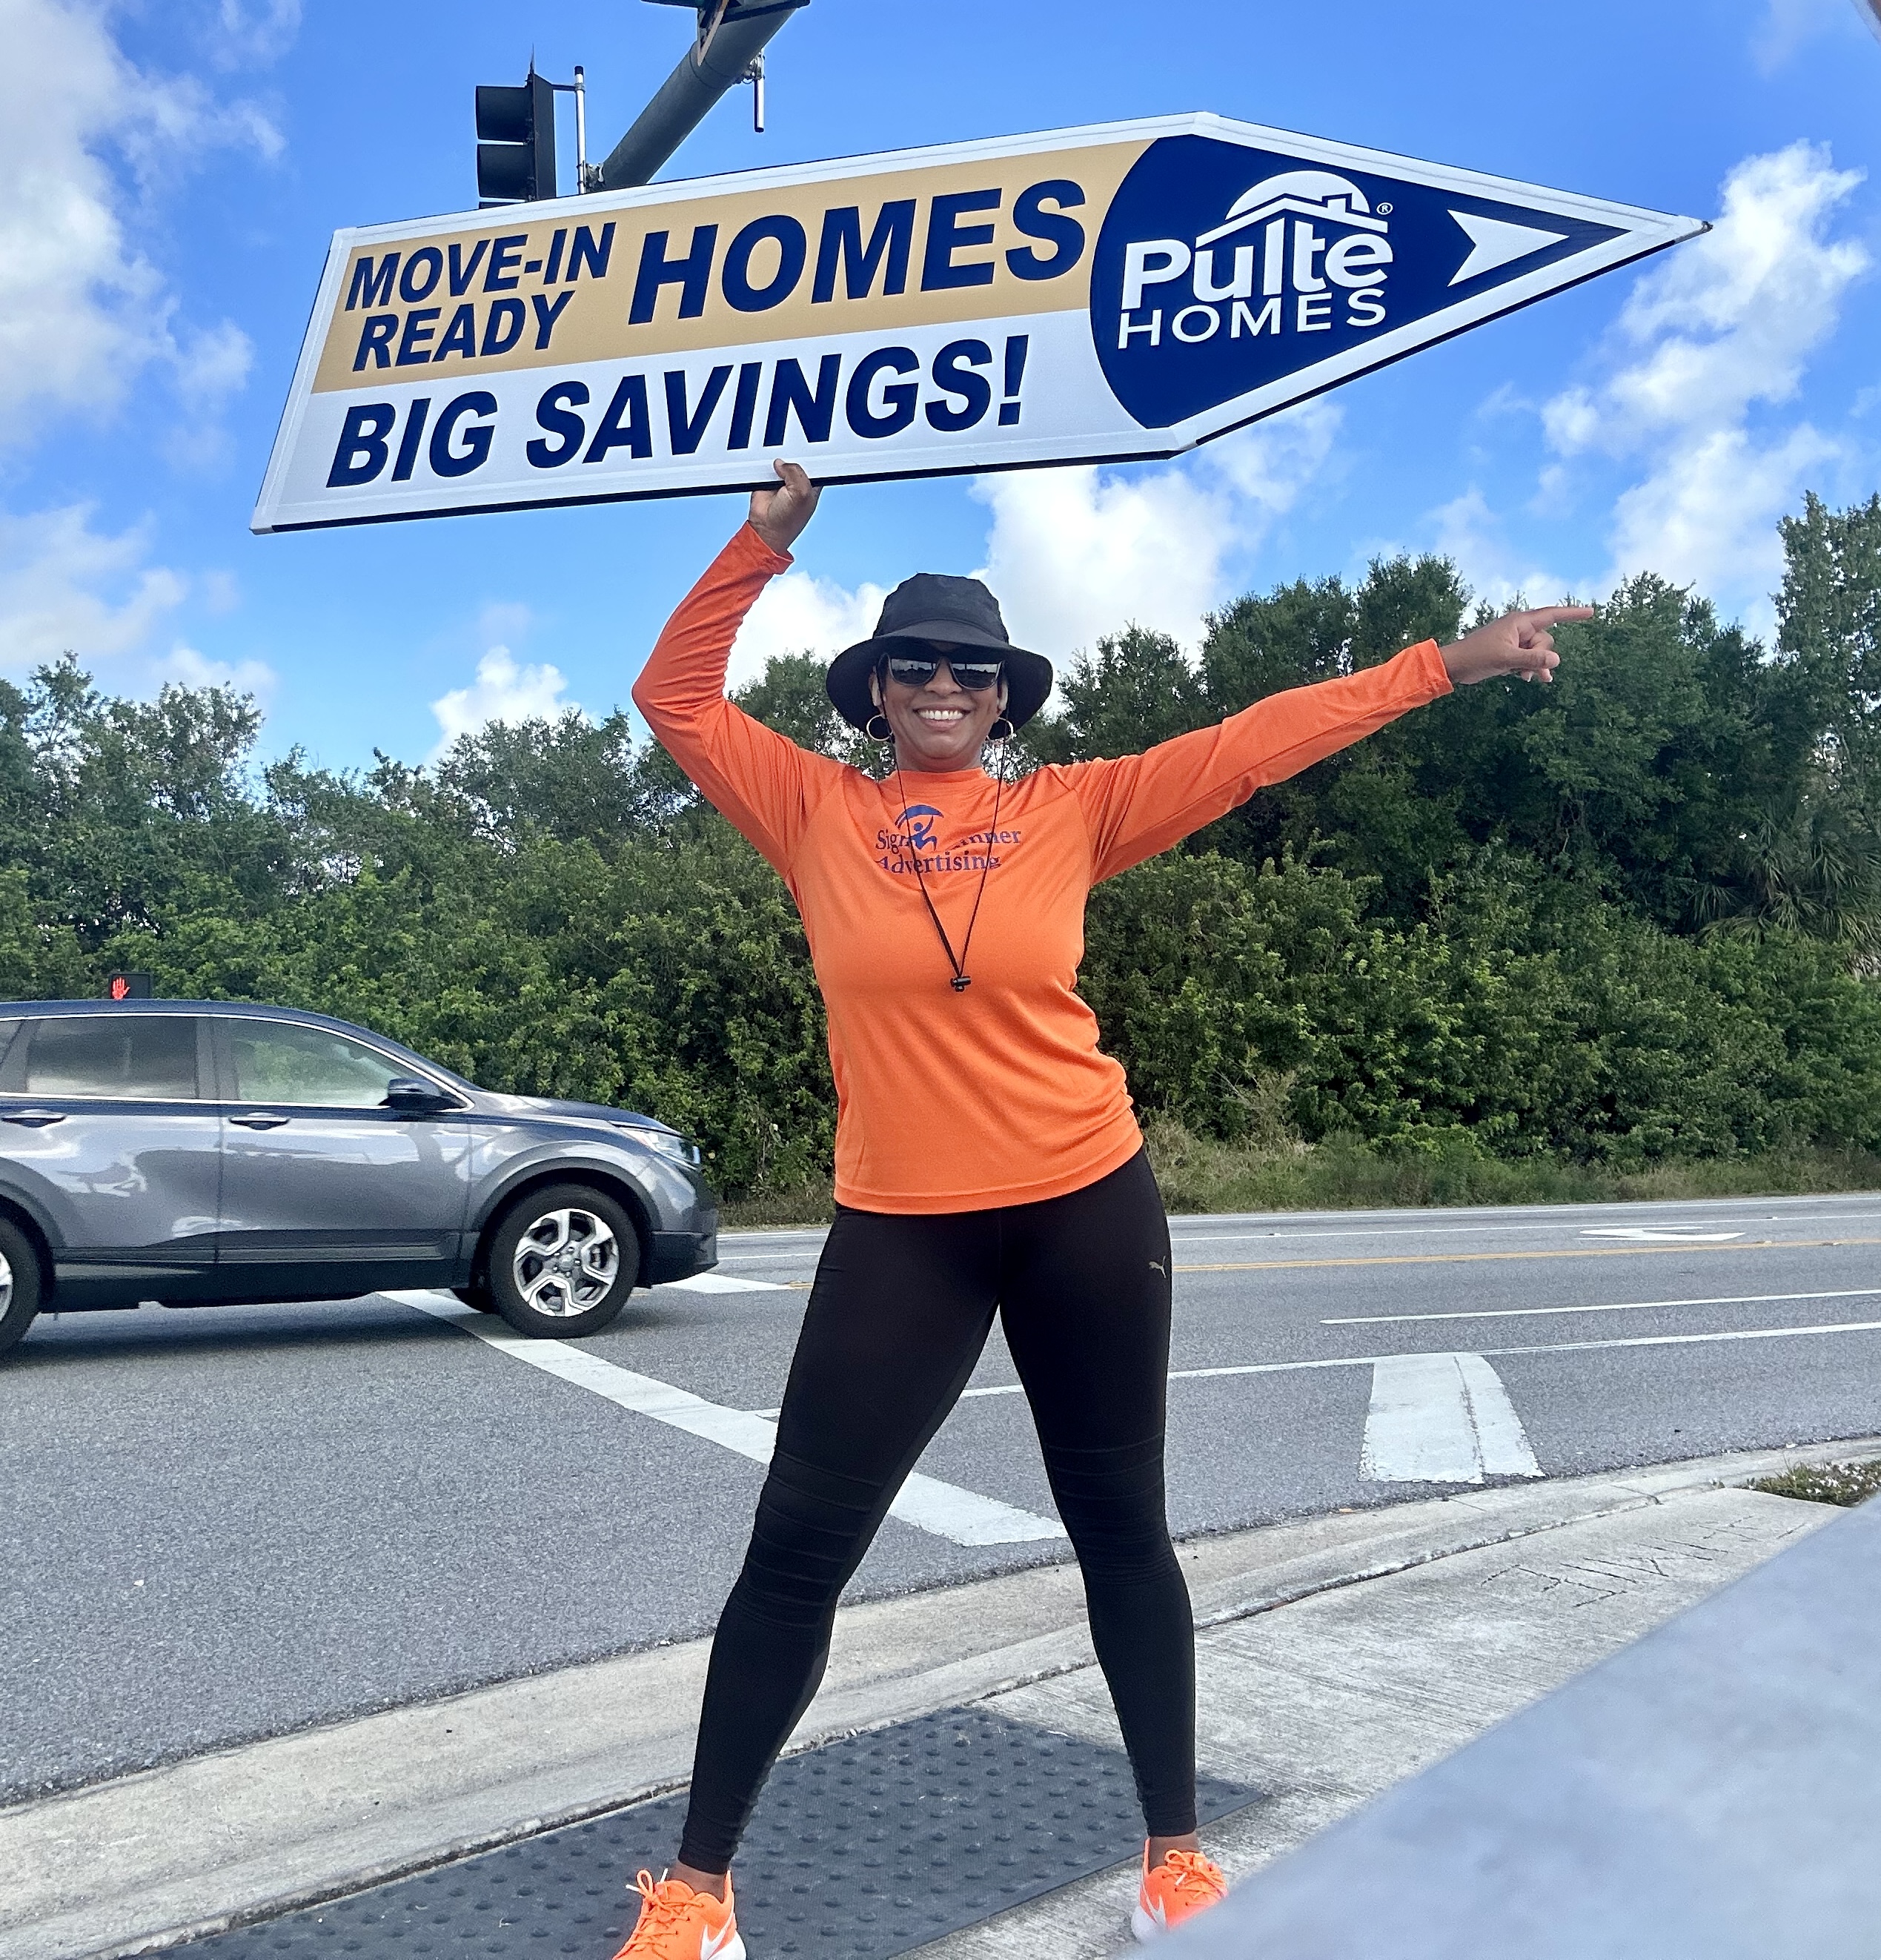 Sign Spinners for Pulte Homes in Florida